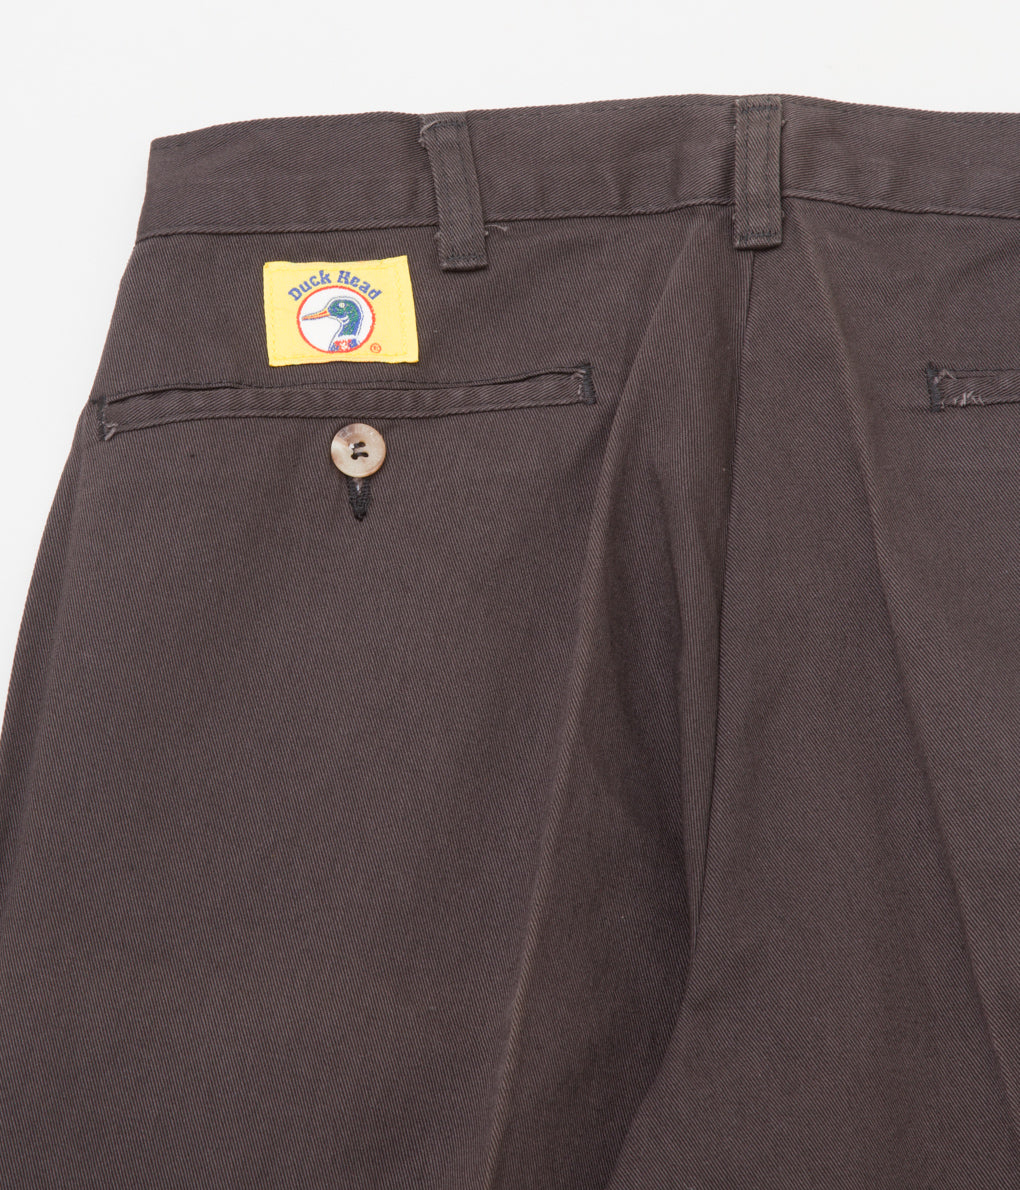 FROM USA "DUCK HEAD TWILL PANTS"(BROWN)